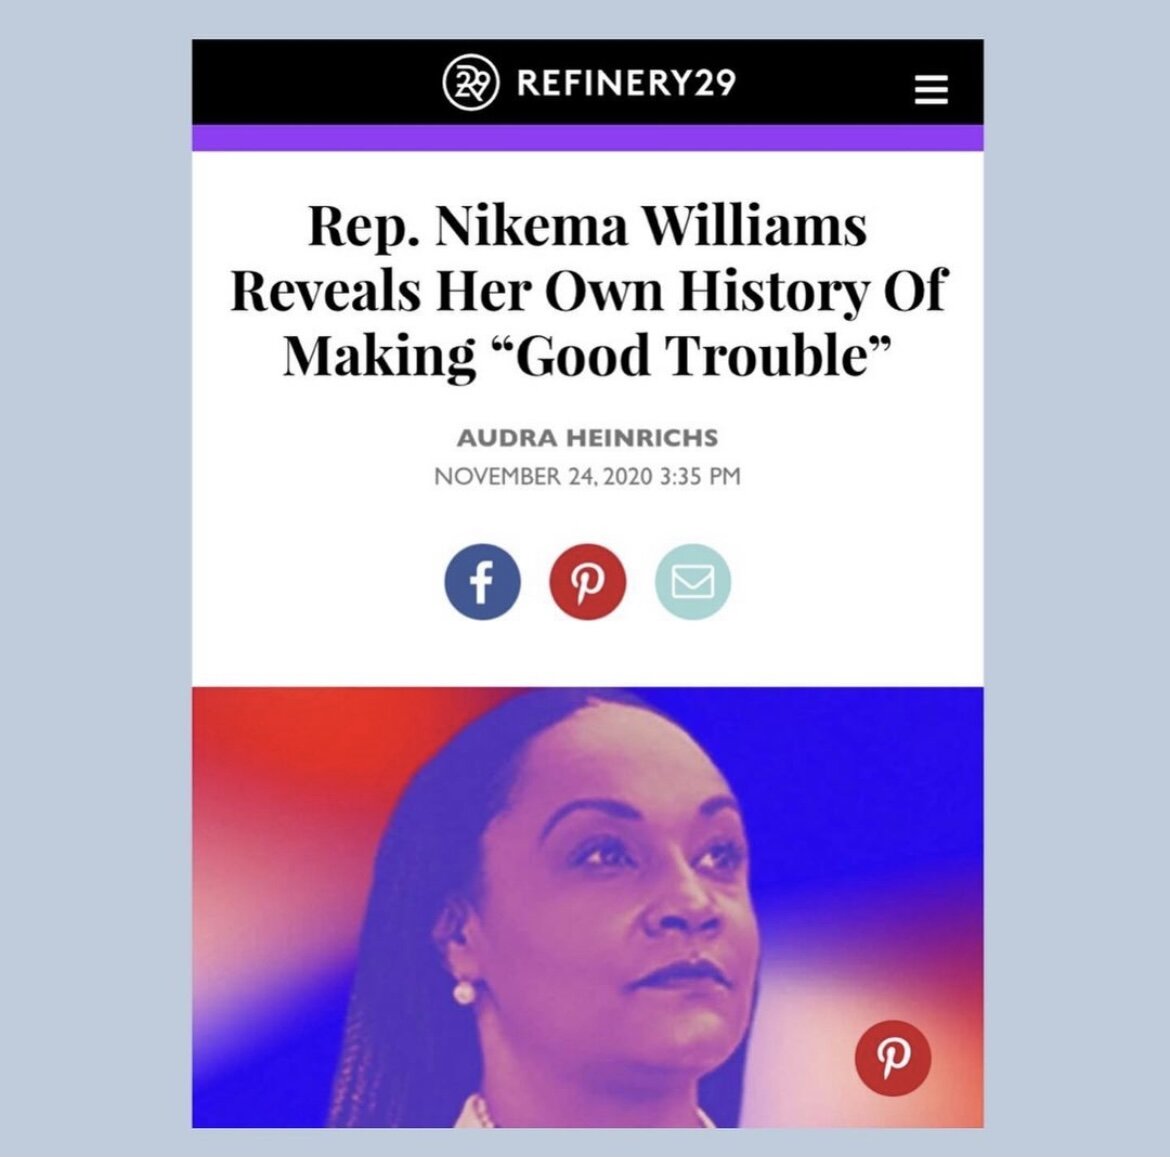  Article in Refinery29: Rep. Nikema Williams Reveals. Her Own History of Making “Good Trouble”  